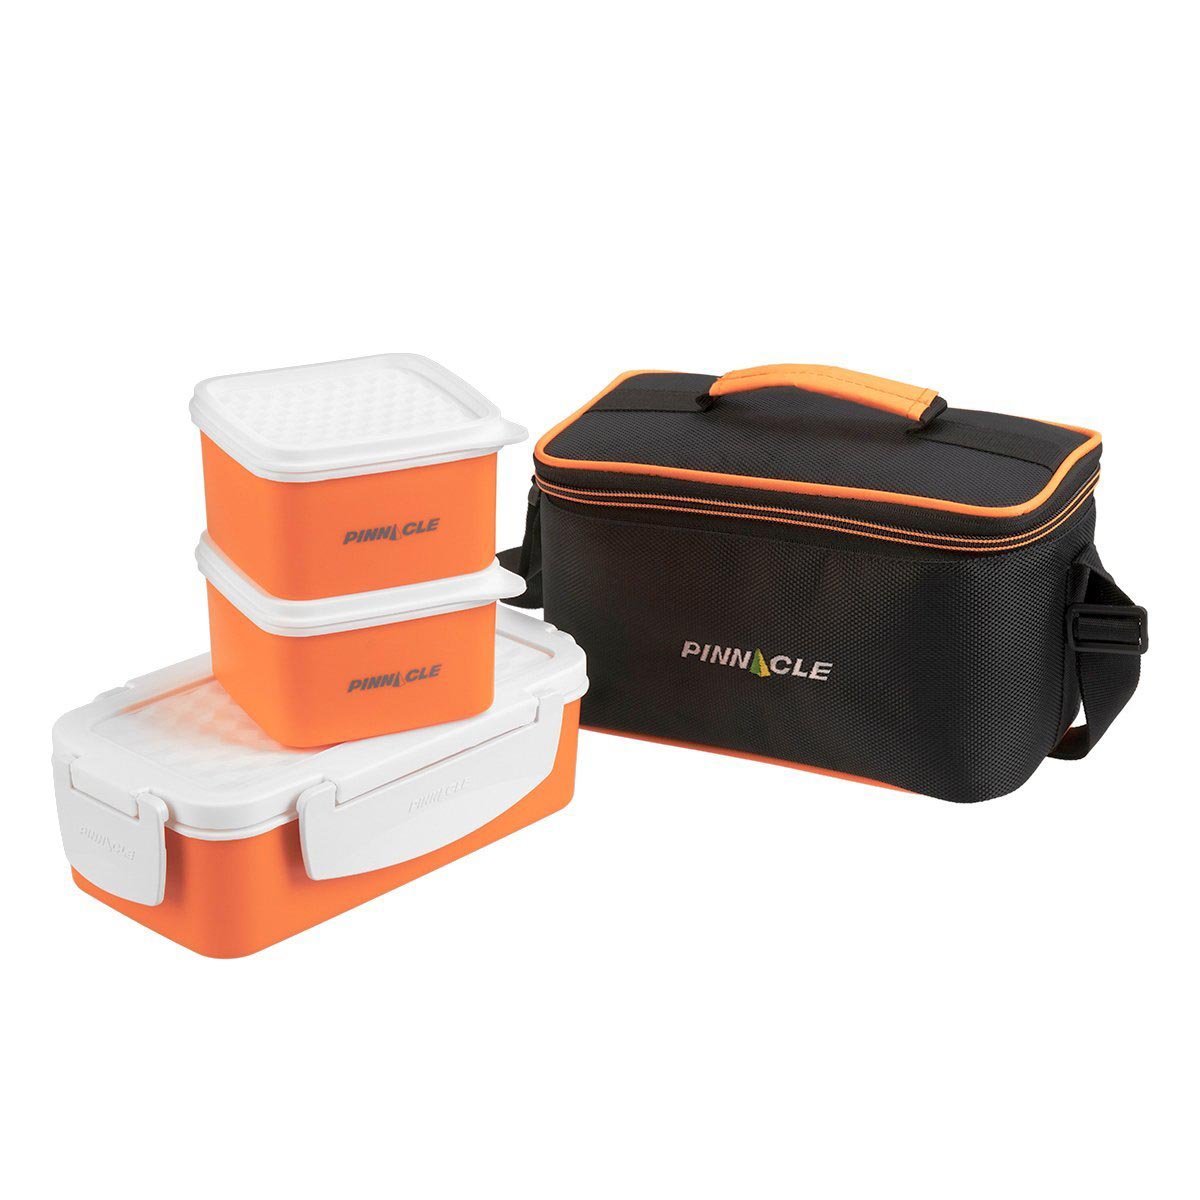  Lunch Box ~ Pinnacle Insulated Leak Proof Lunch Box